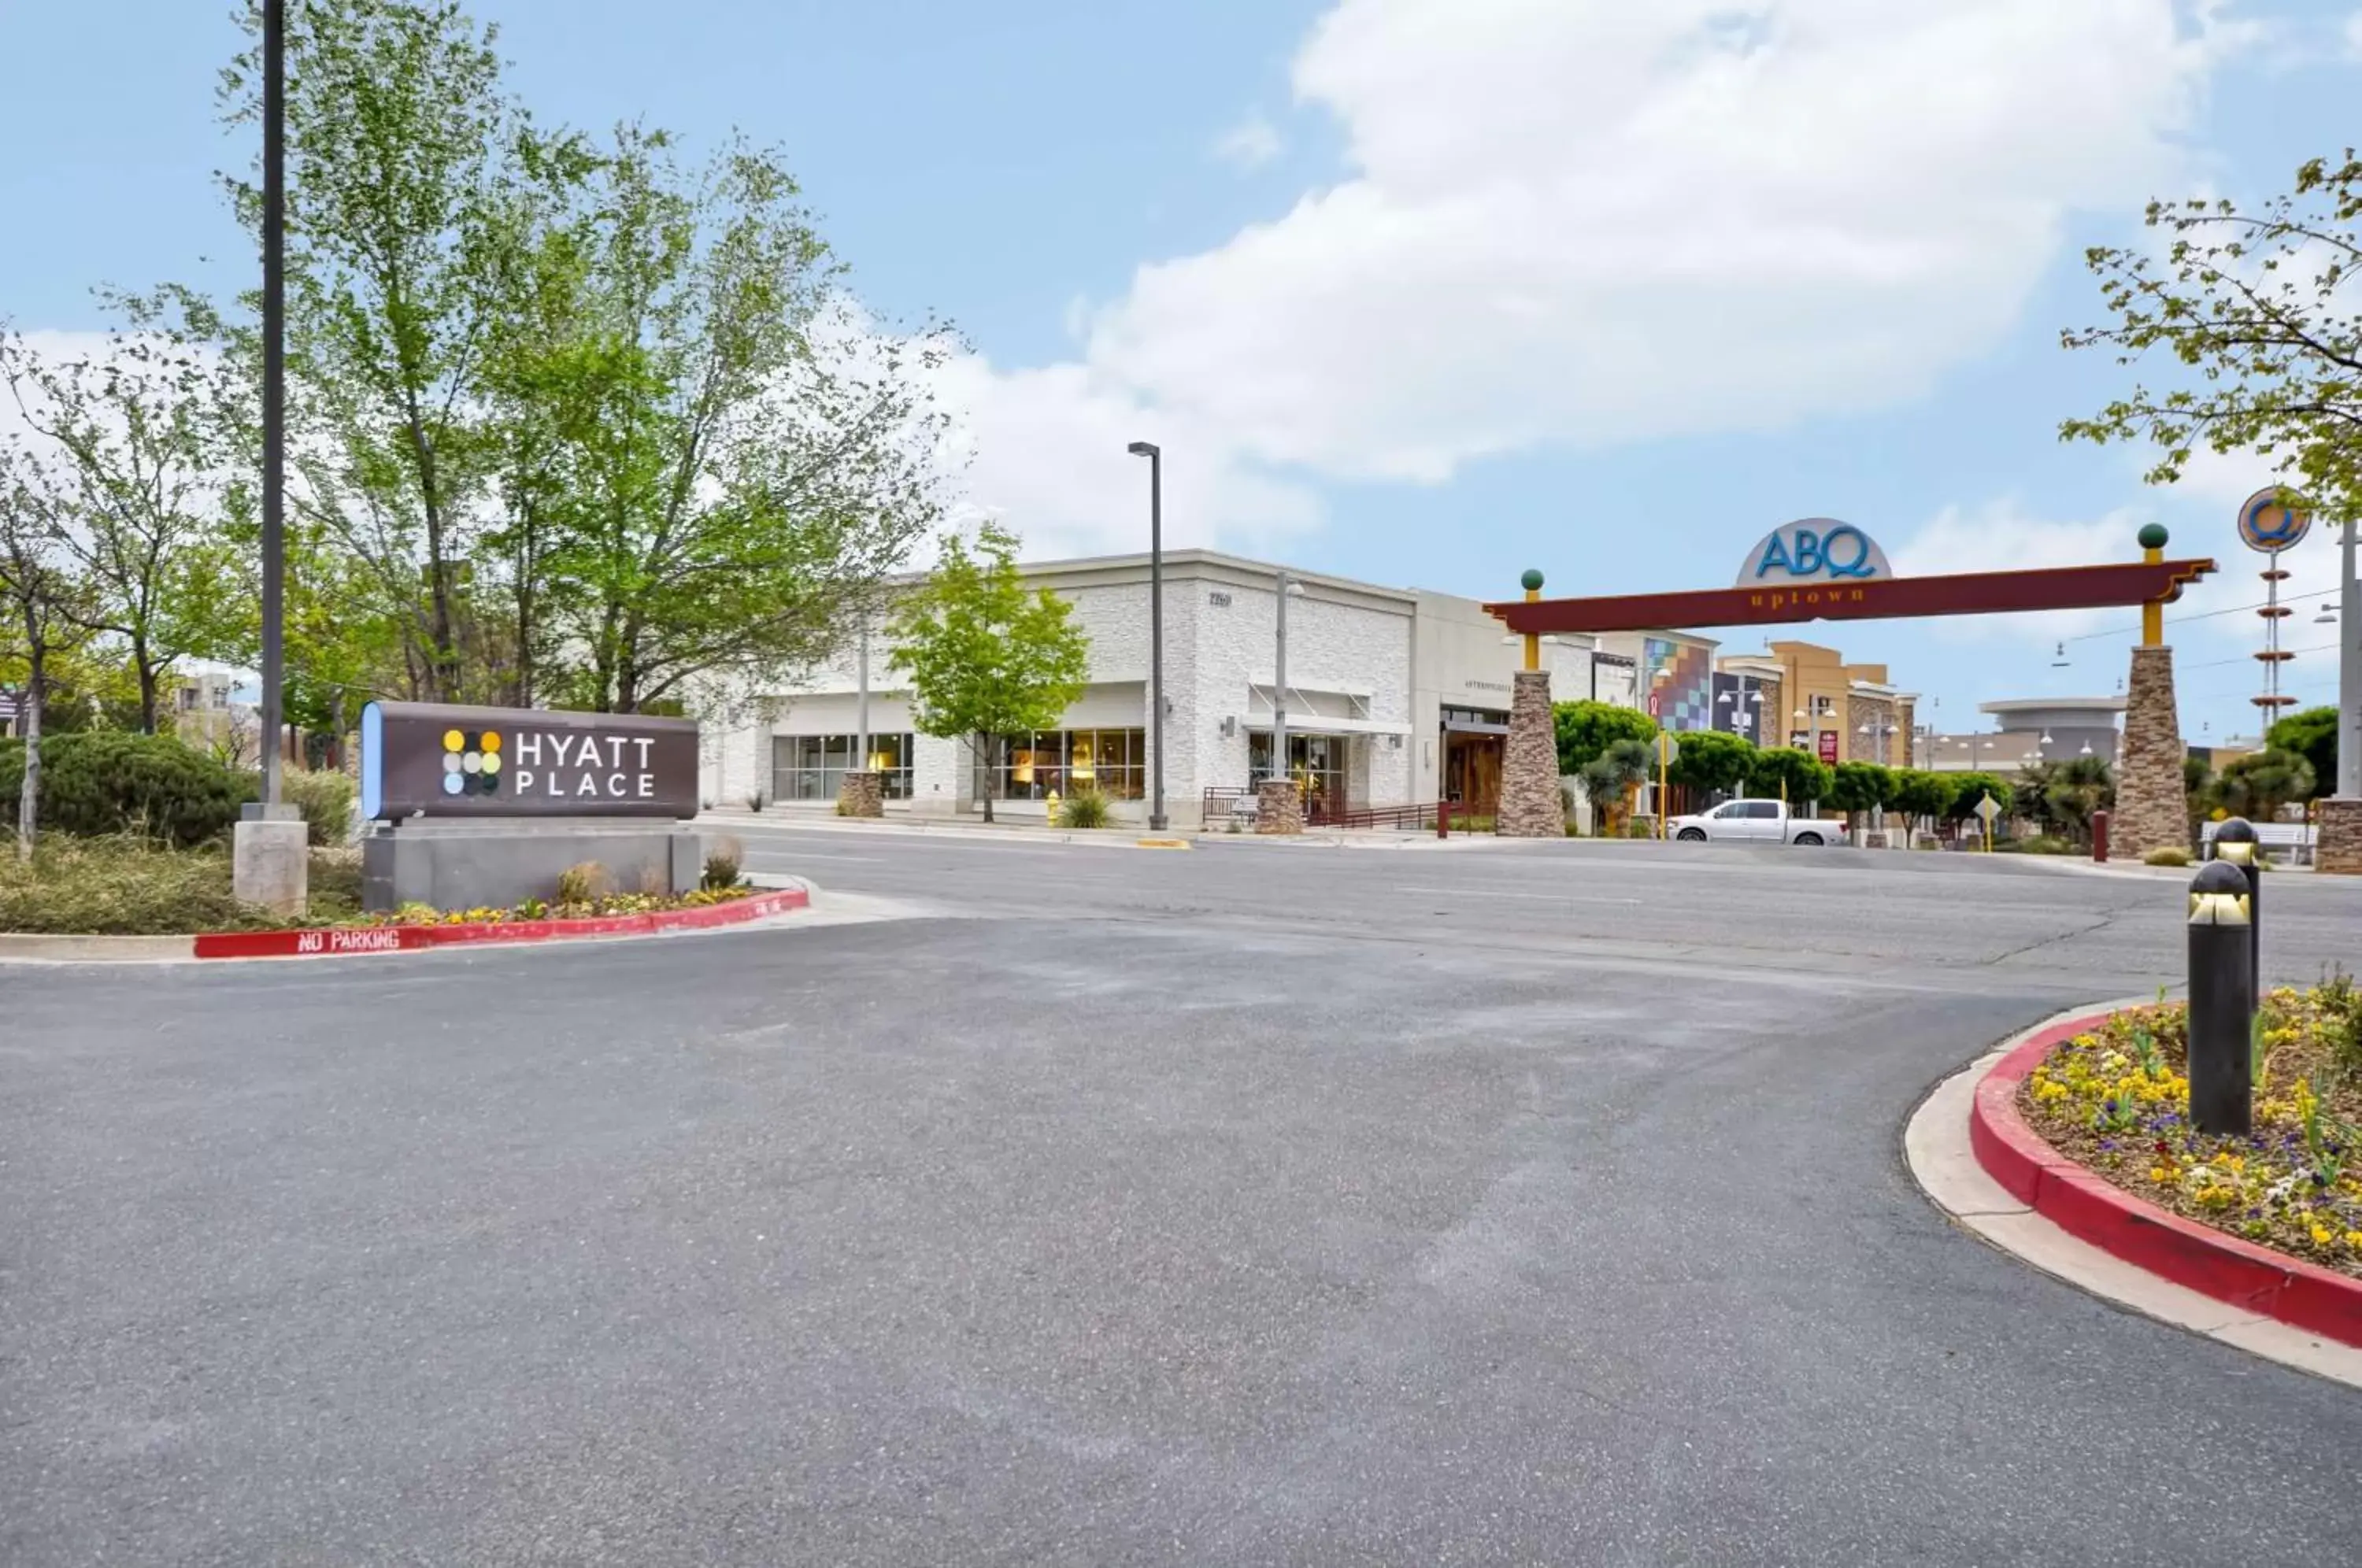 Off site, Property Building in Hyatt Place Albuquerque Uptown